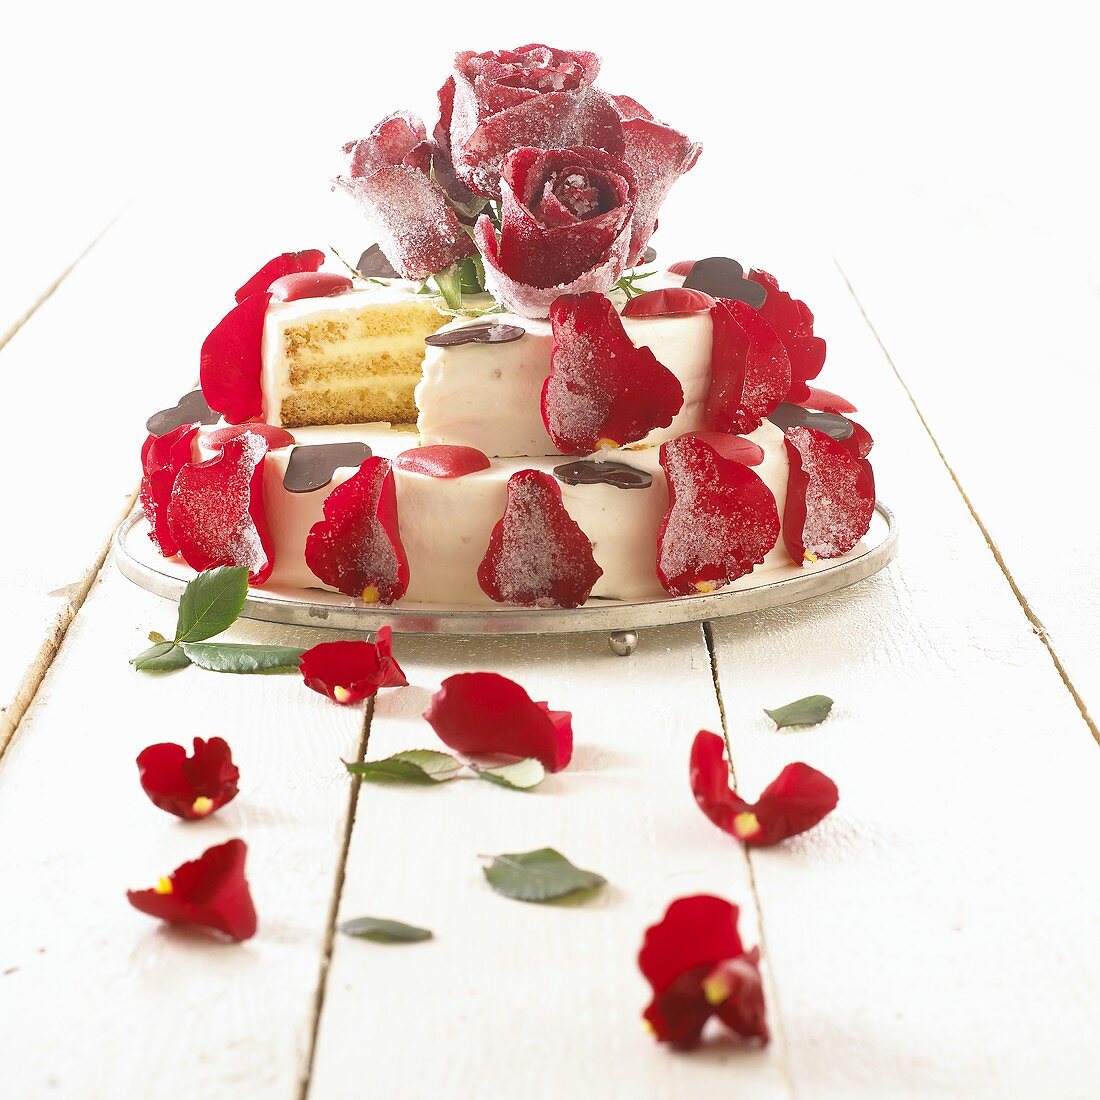 Wedding cake with red rose petals